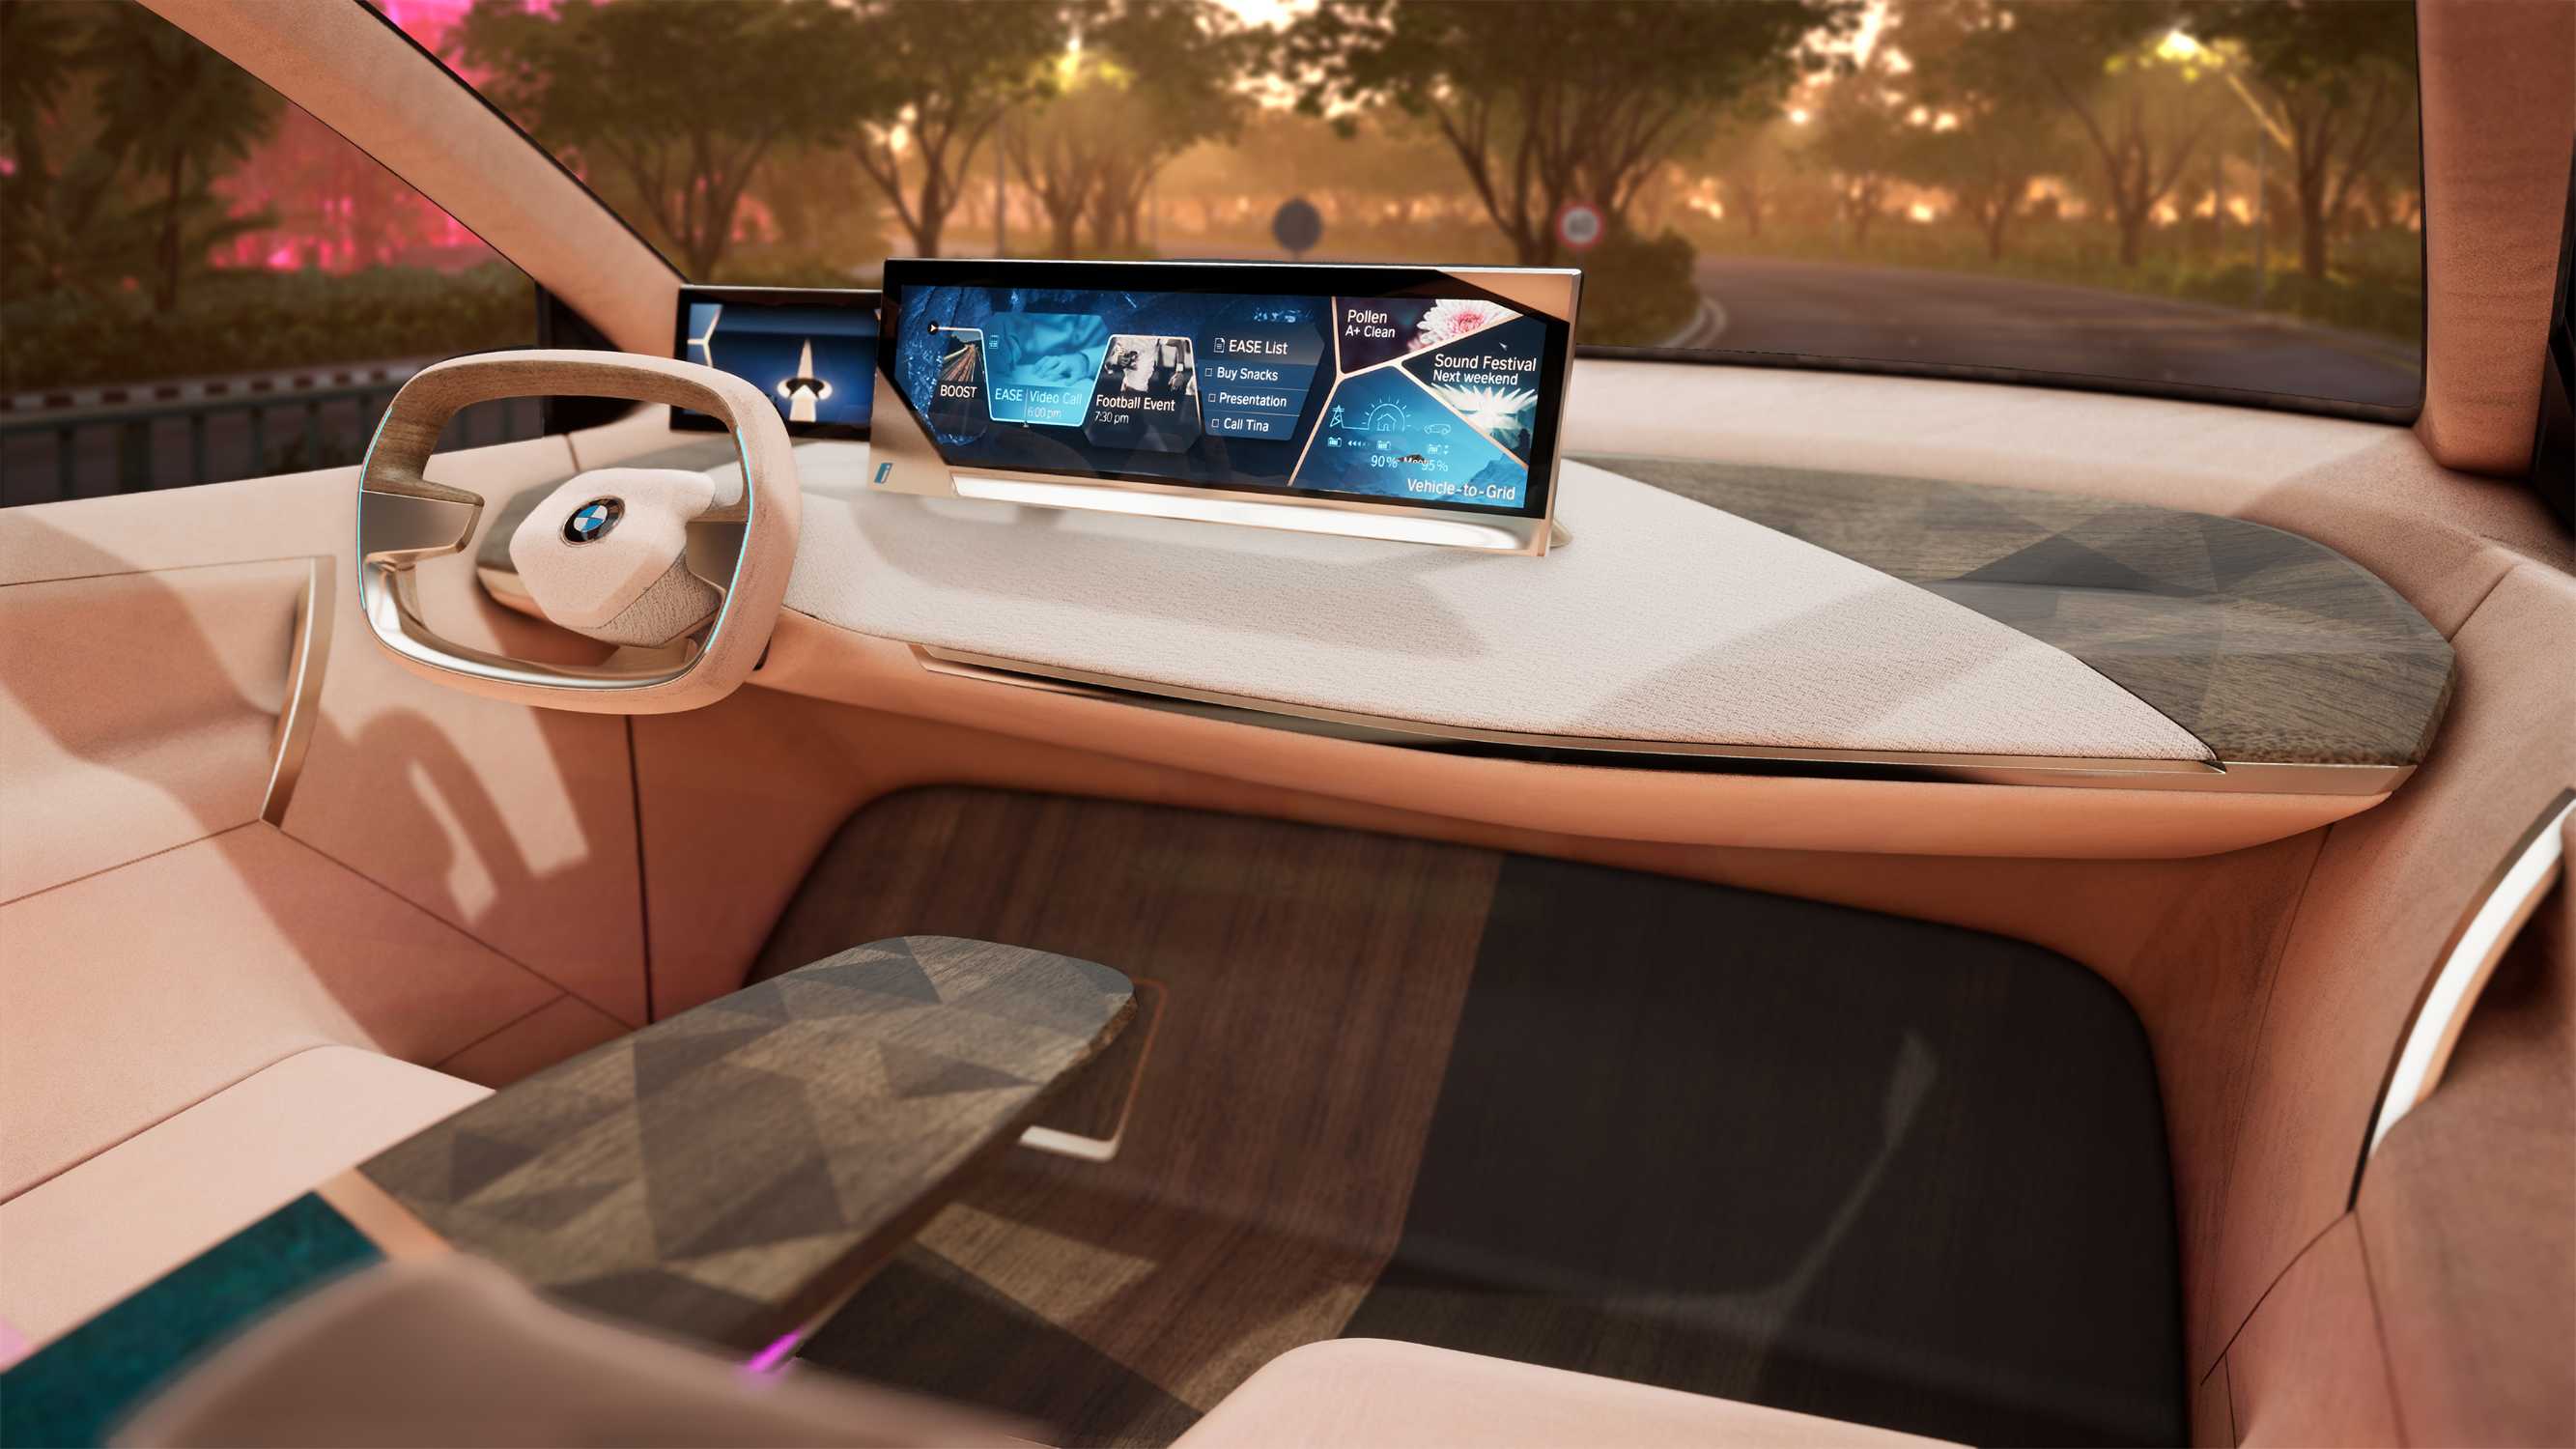 P90334010-bmw-vision-inext-mixed-reality-12-2018-2667px.jpg